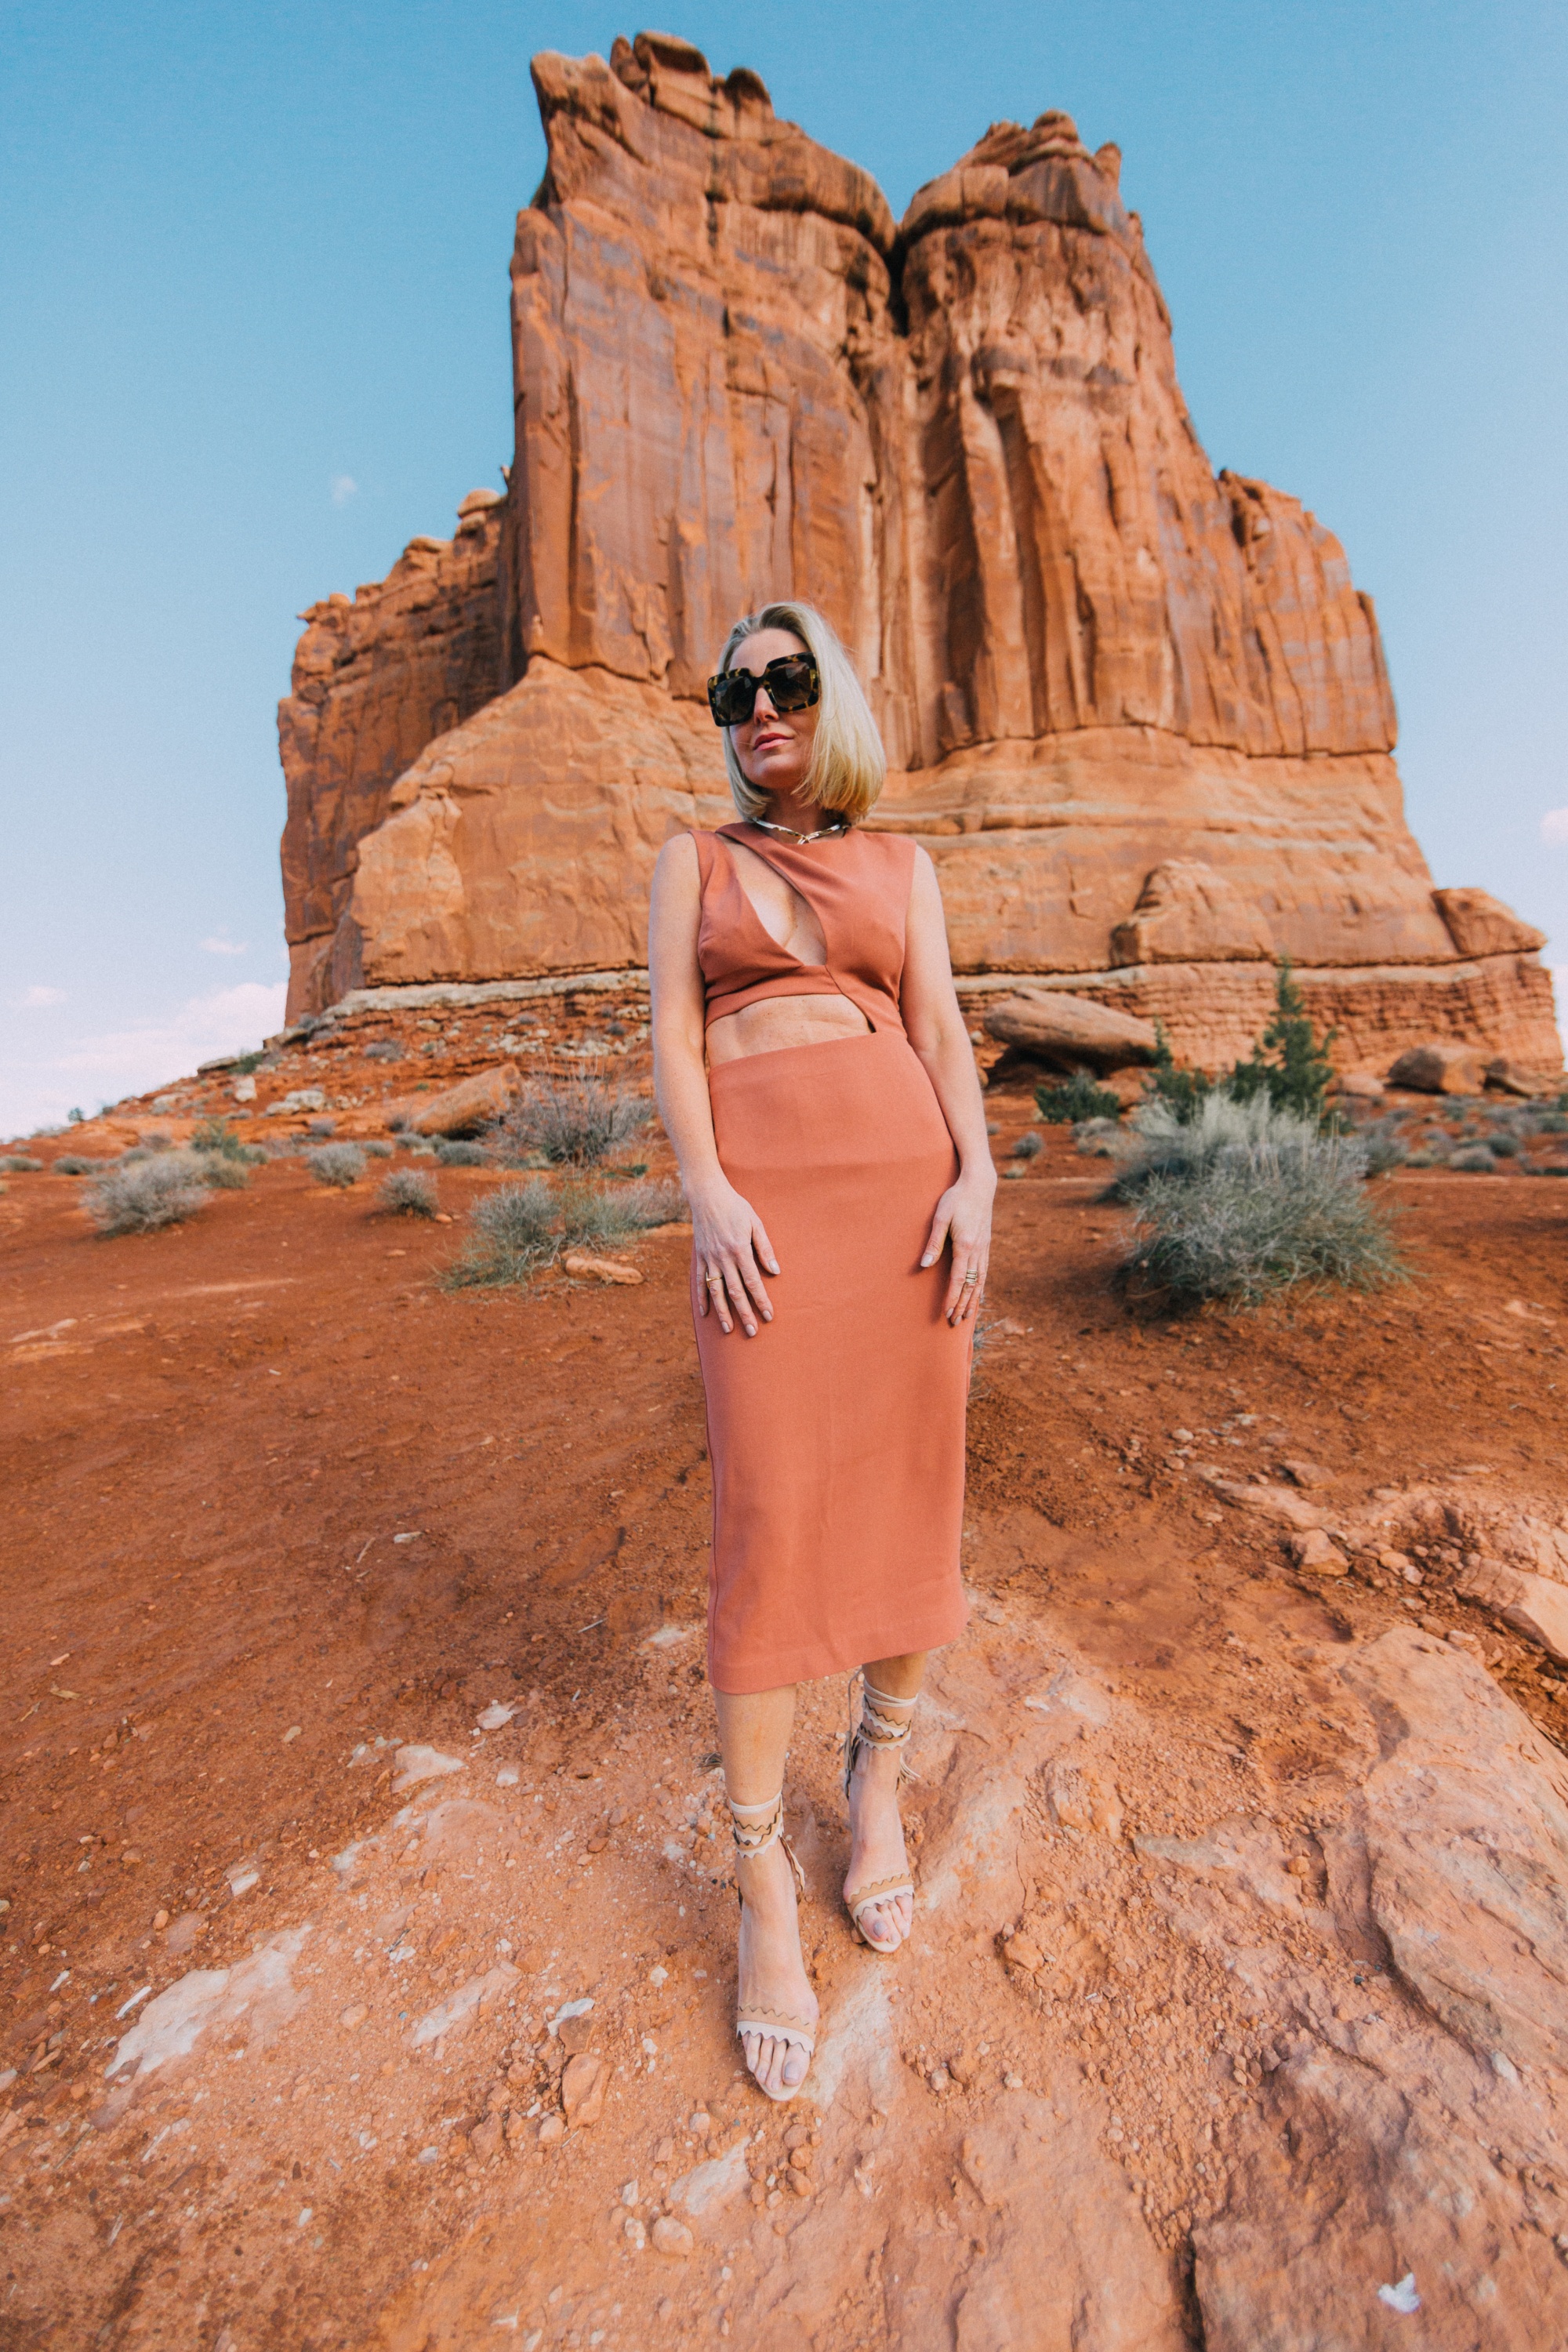 Vacation Dresses, Fashion blogger over 40 Erin Busbee of BusbeeStyle.com wearing a rusty pink cutout dress by NBD from Revolve with Schutz strappy sandals in Moab, Utah